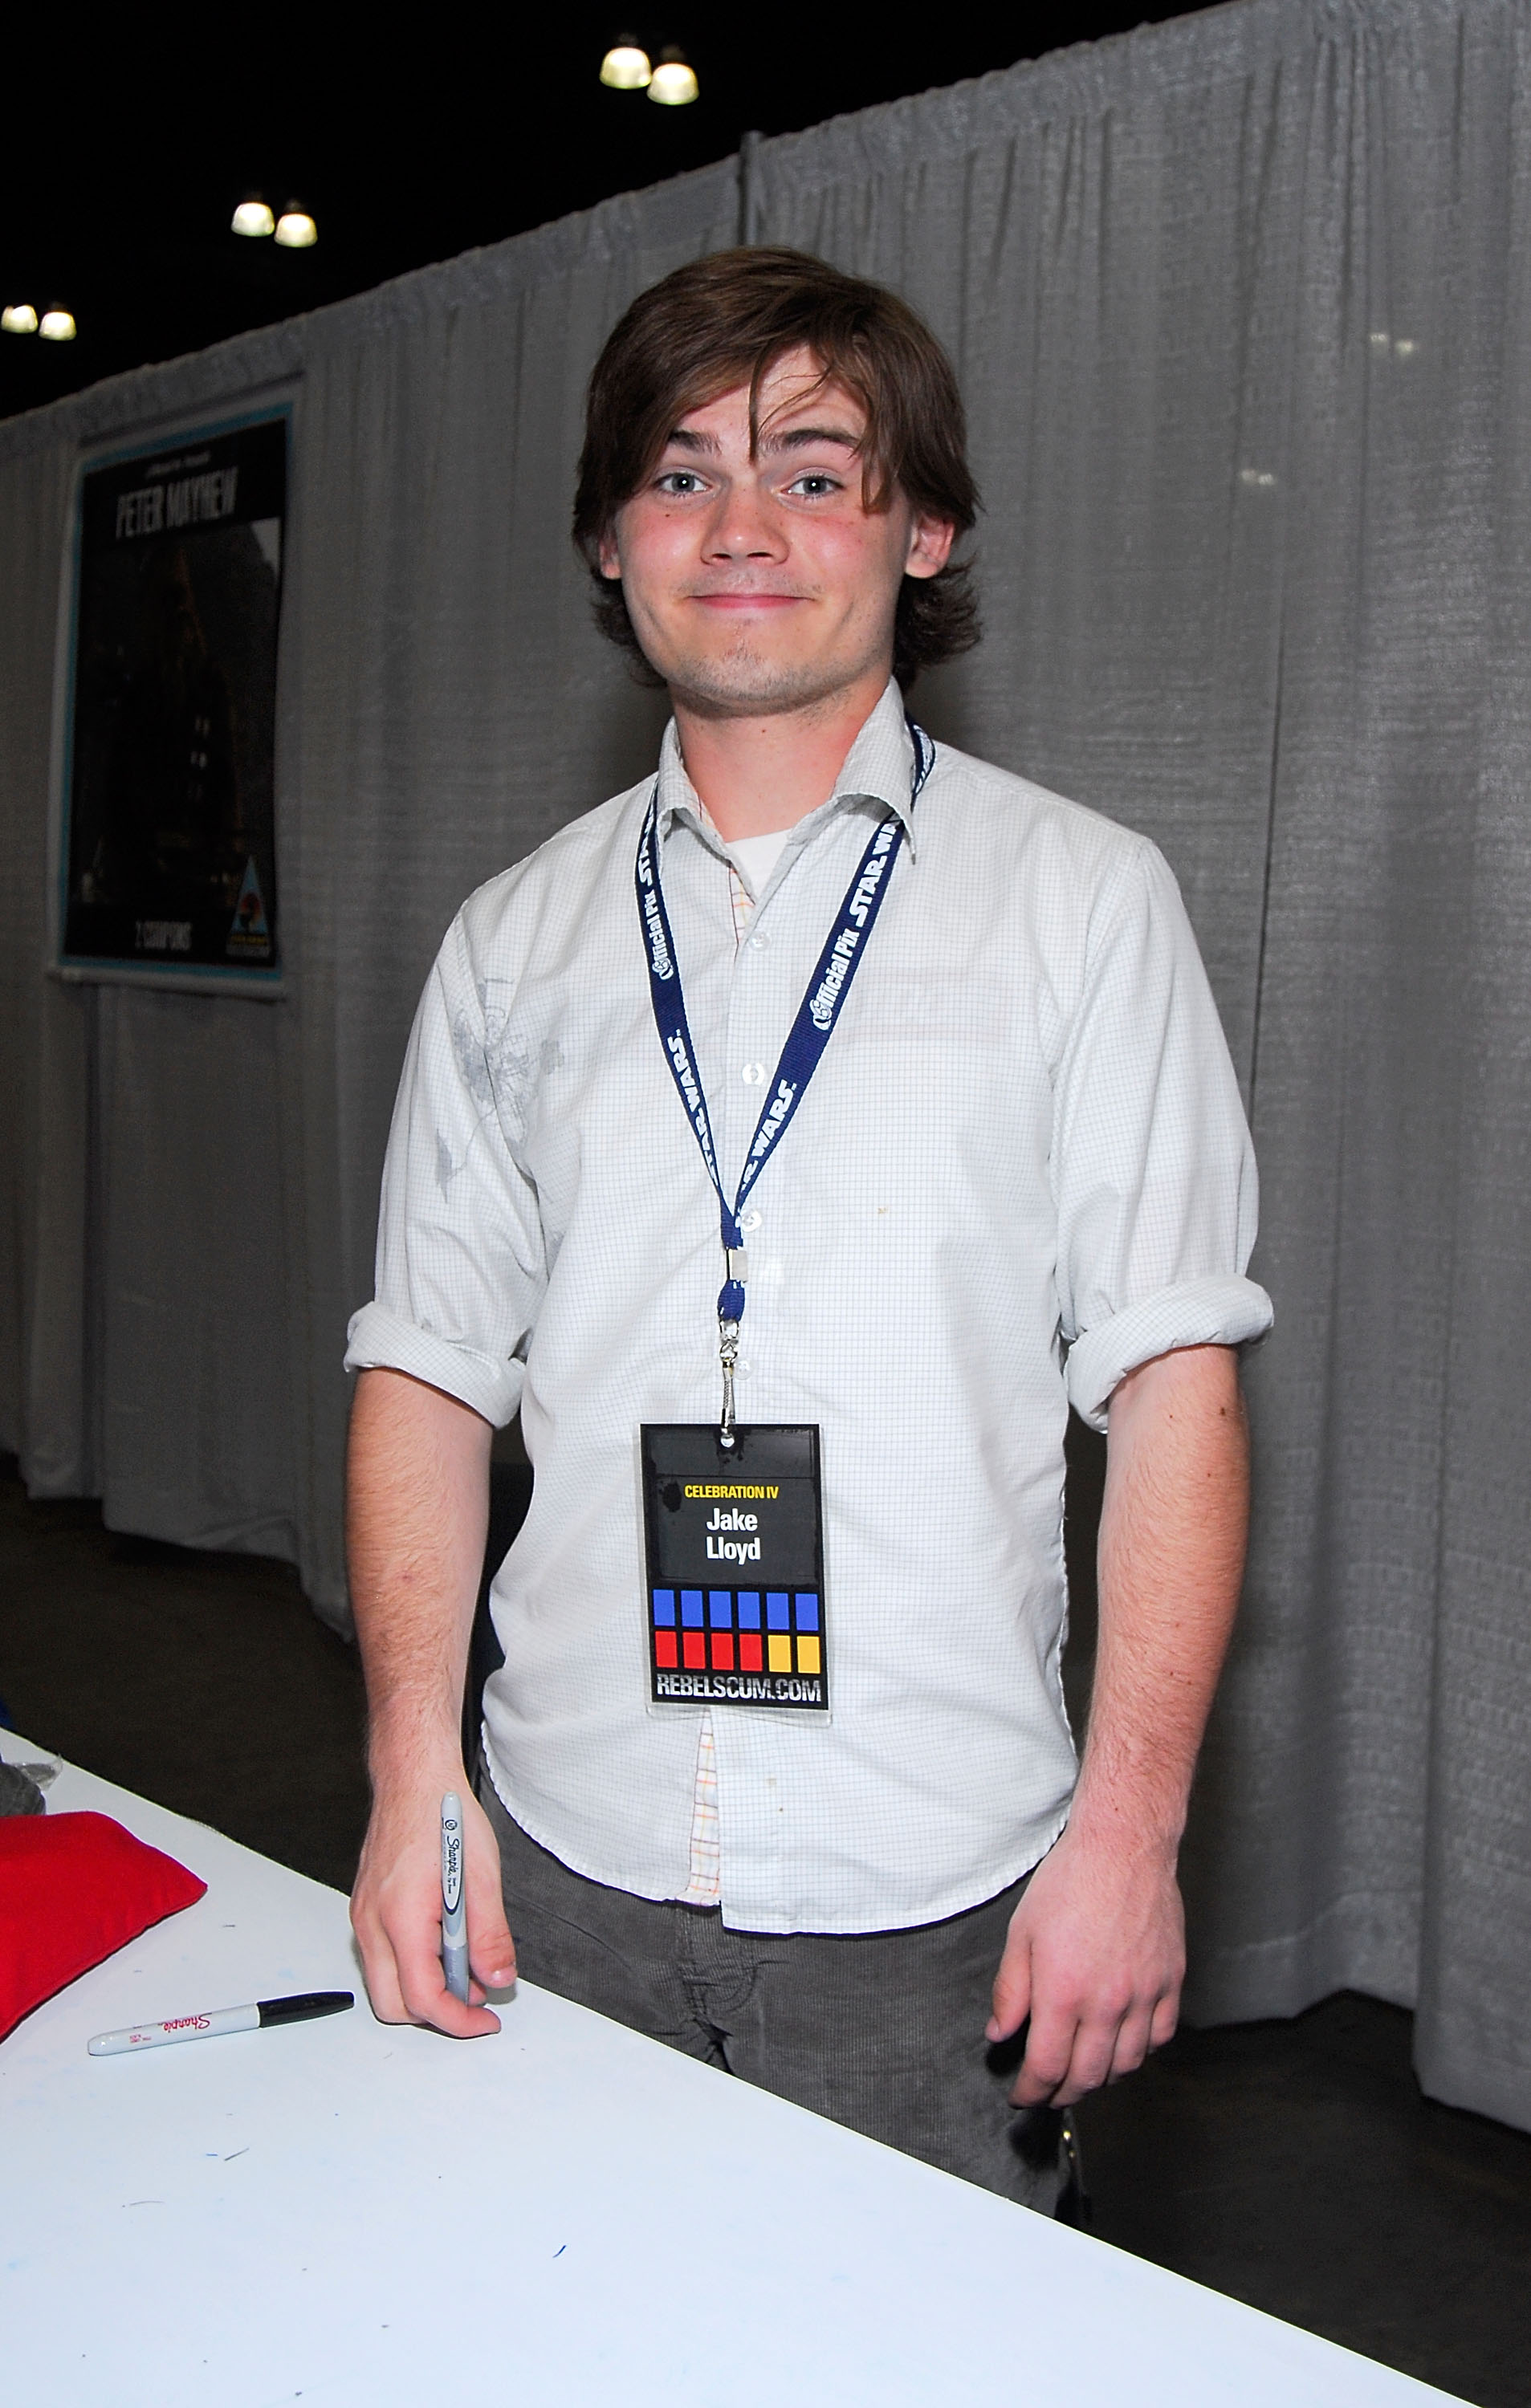 Jake Lloyd attends the "Star Wars Celebration IV" convention on May 27, 2007 in Los Angeles, California | Source: Getty images